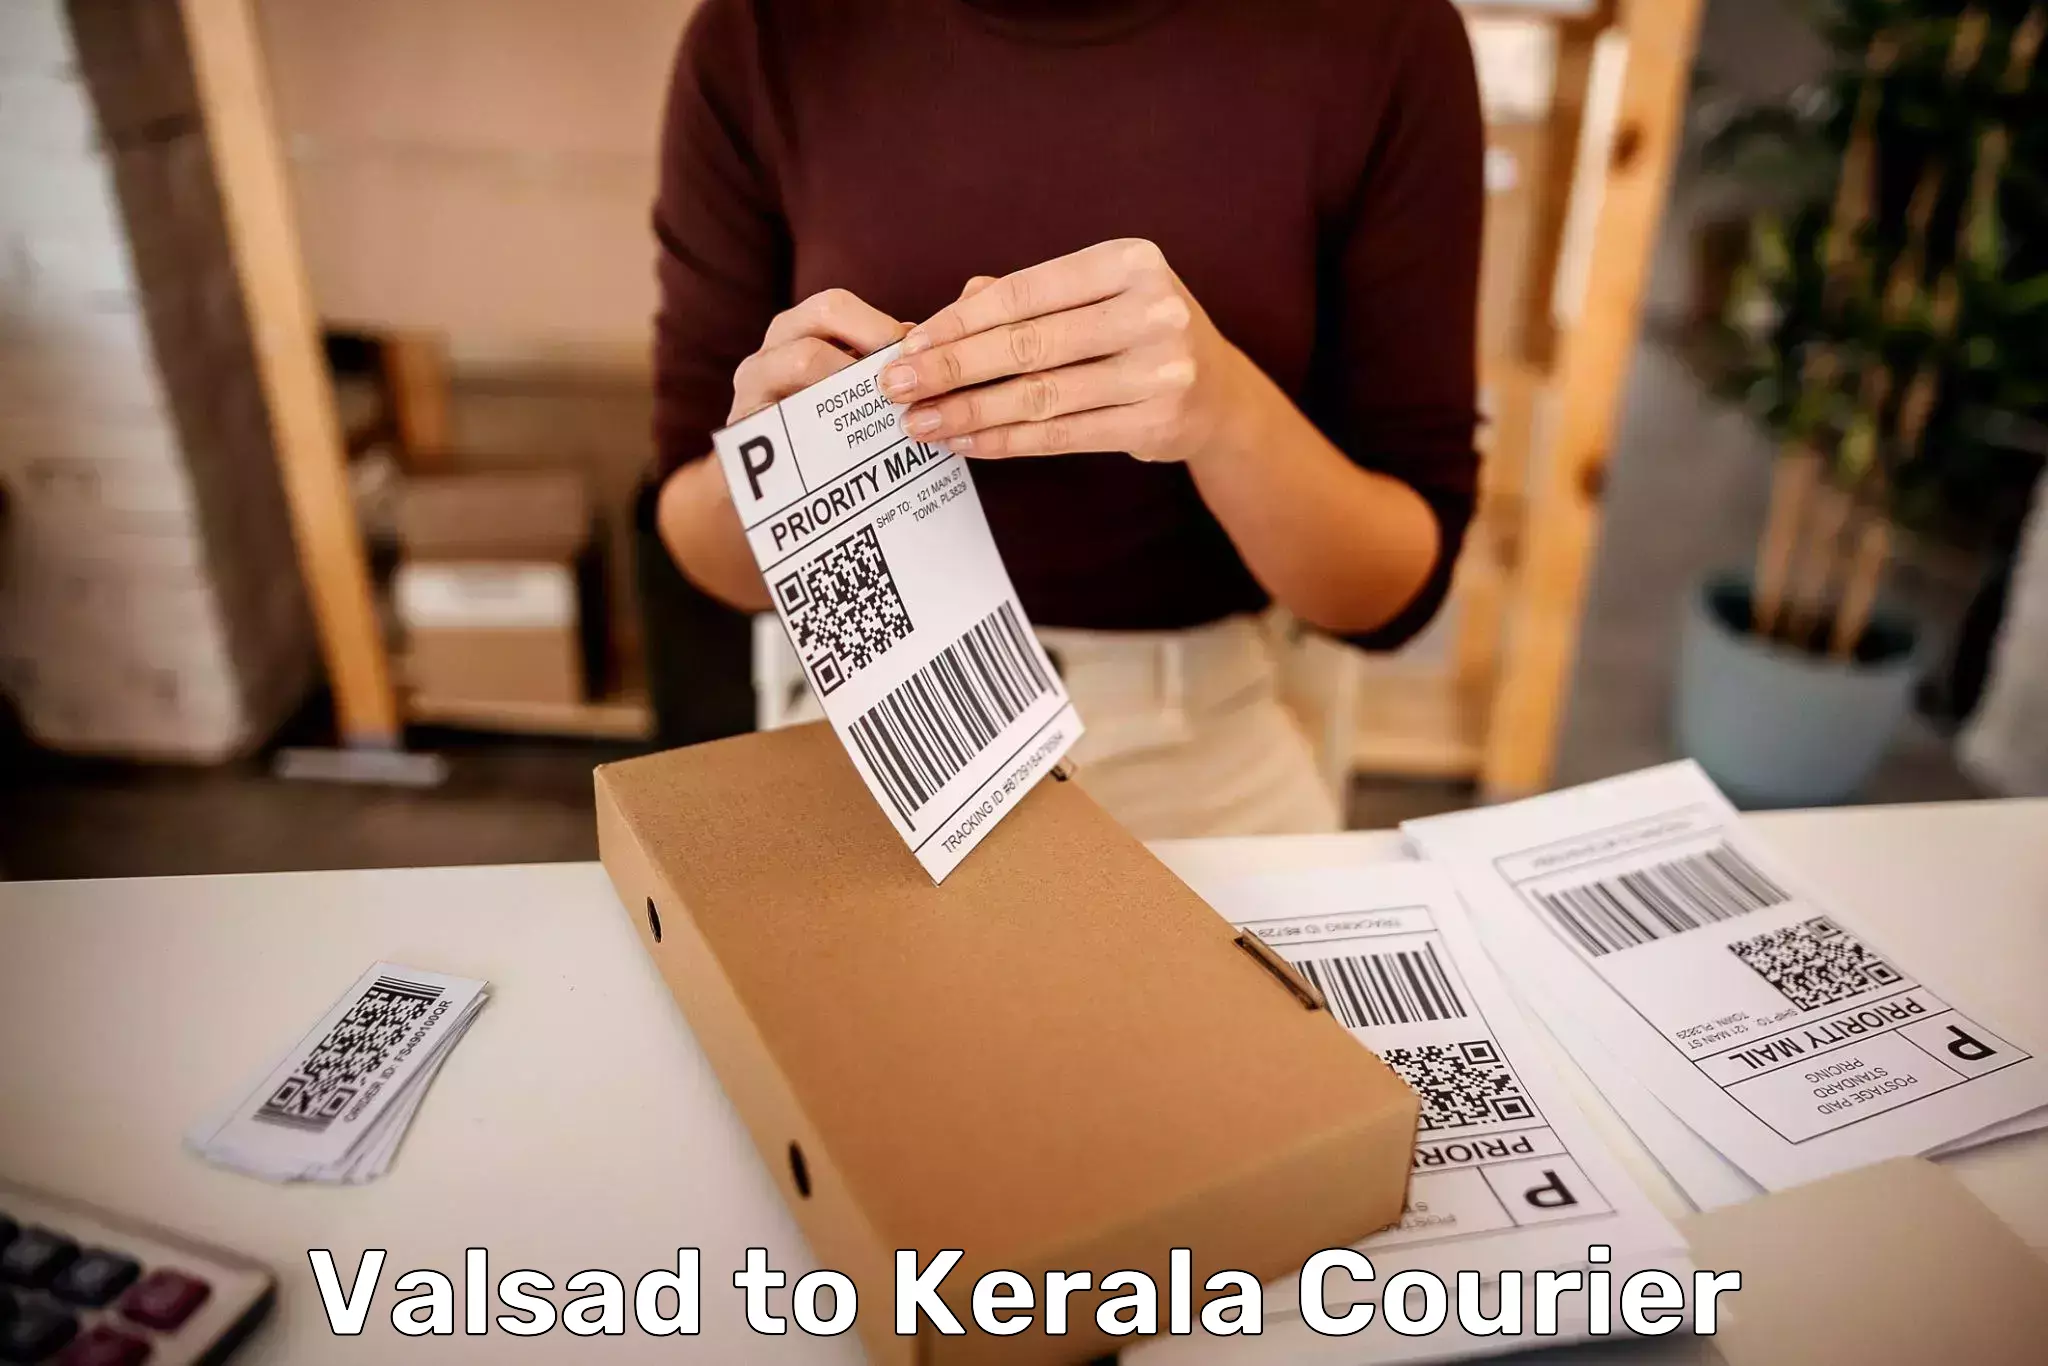 Luggage shipping specialists Valsad to Kerala